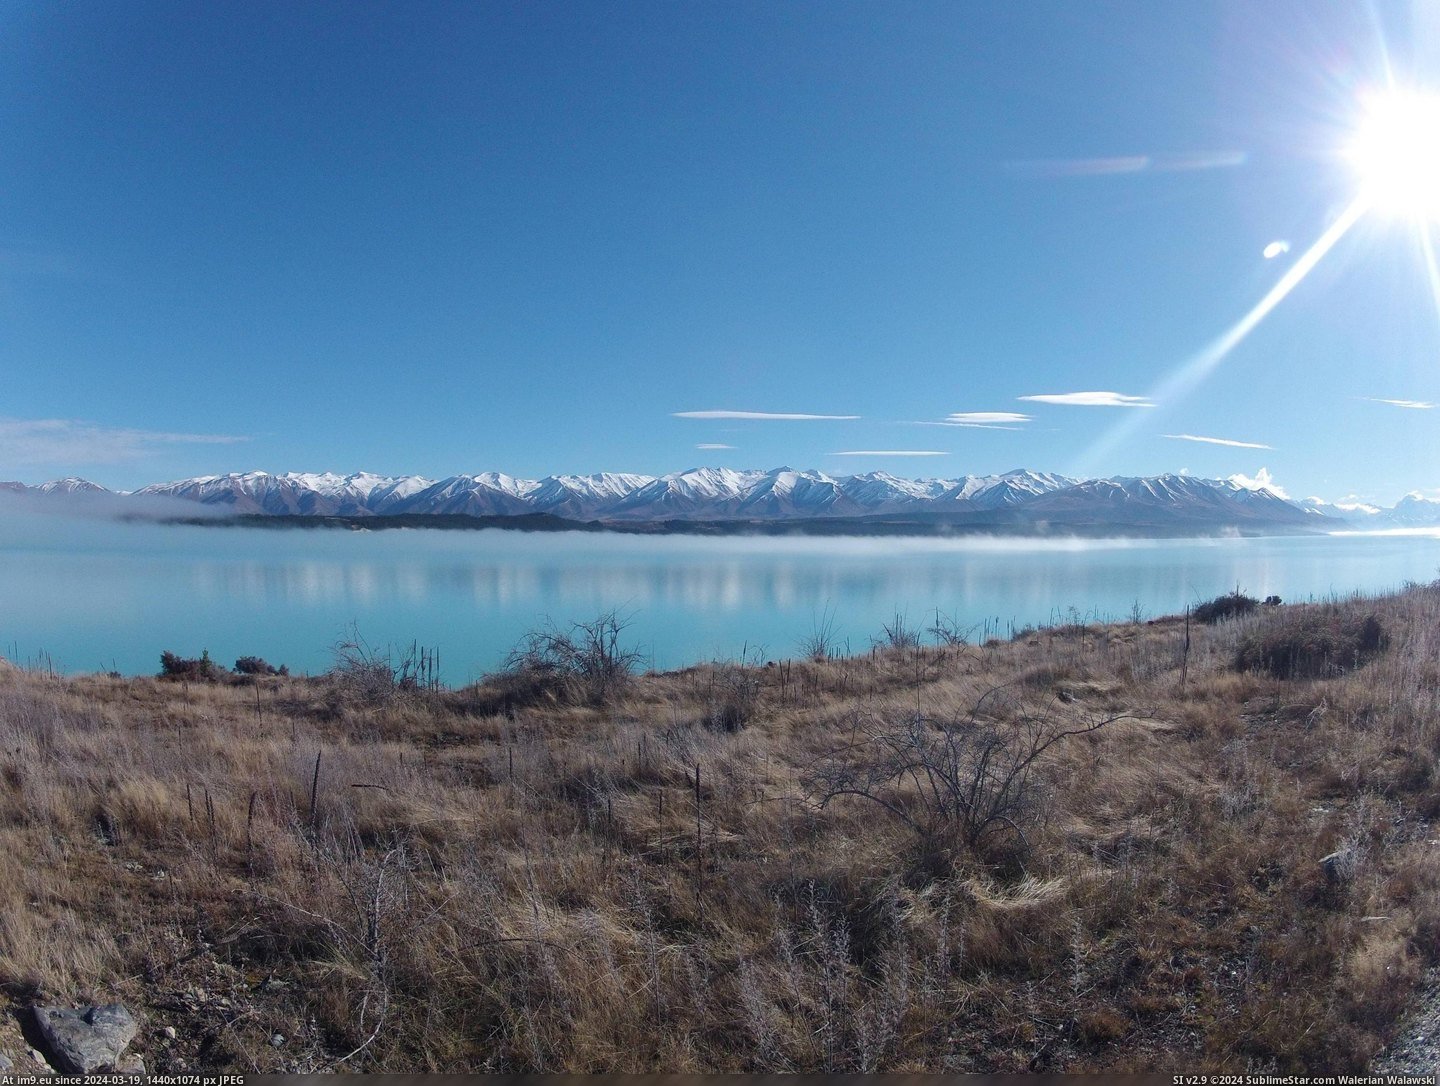 #Picture #Lake #Tekapo #Zealand #3840x2880 [Earthporn] A picture I took of Lake Tekapo, New Zealand in July 2013 [OC] [3840x2880] Pic. (Image of album My r/EARTHPORN favs))